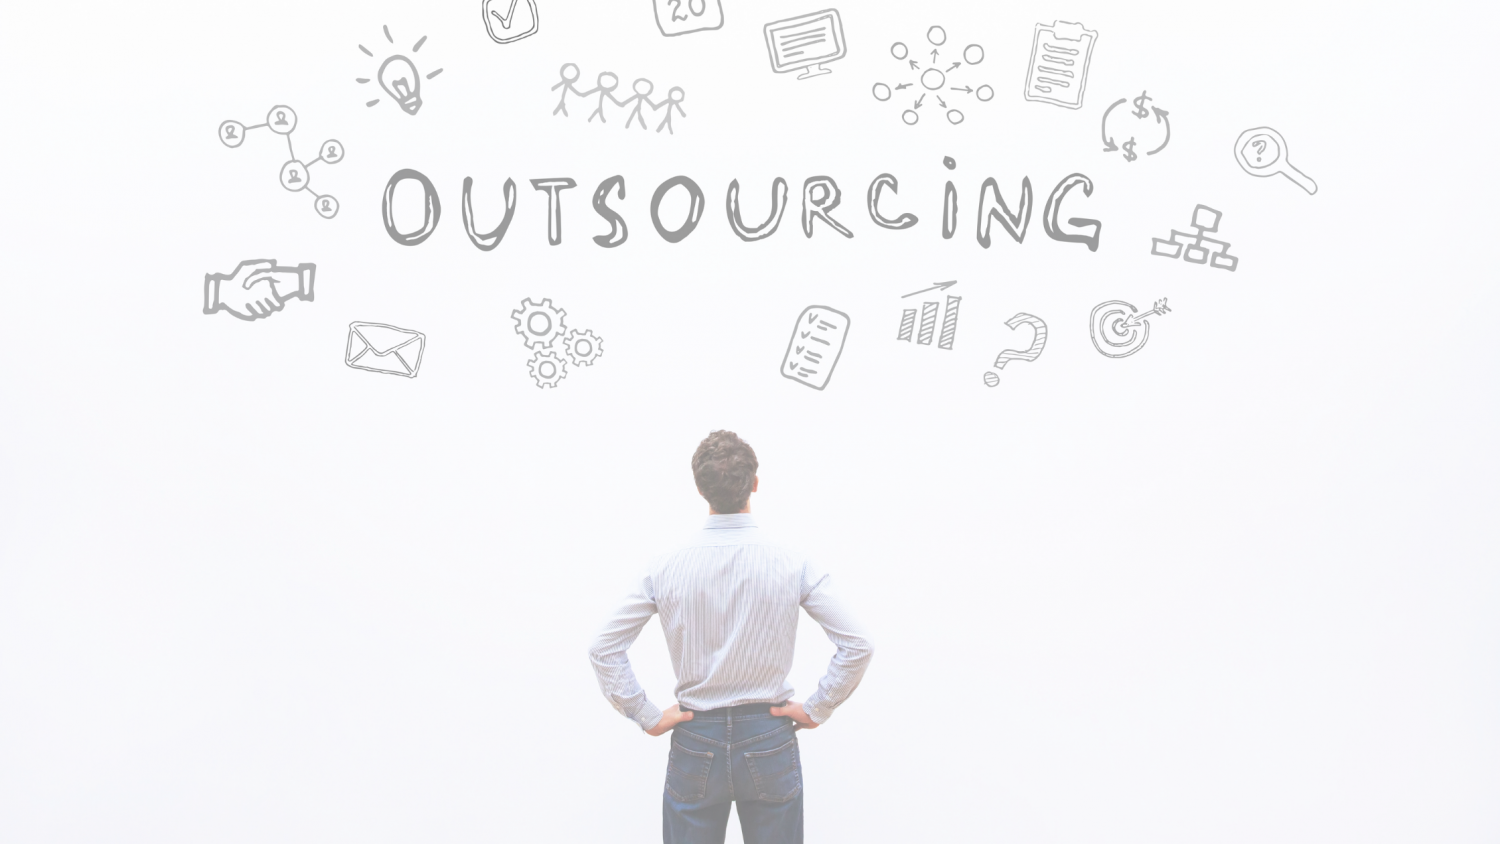 When is the right time to ‘Cue’ the Outsourcing?